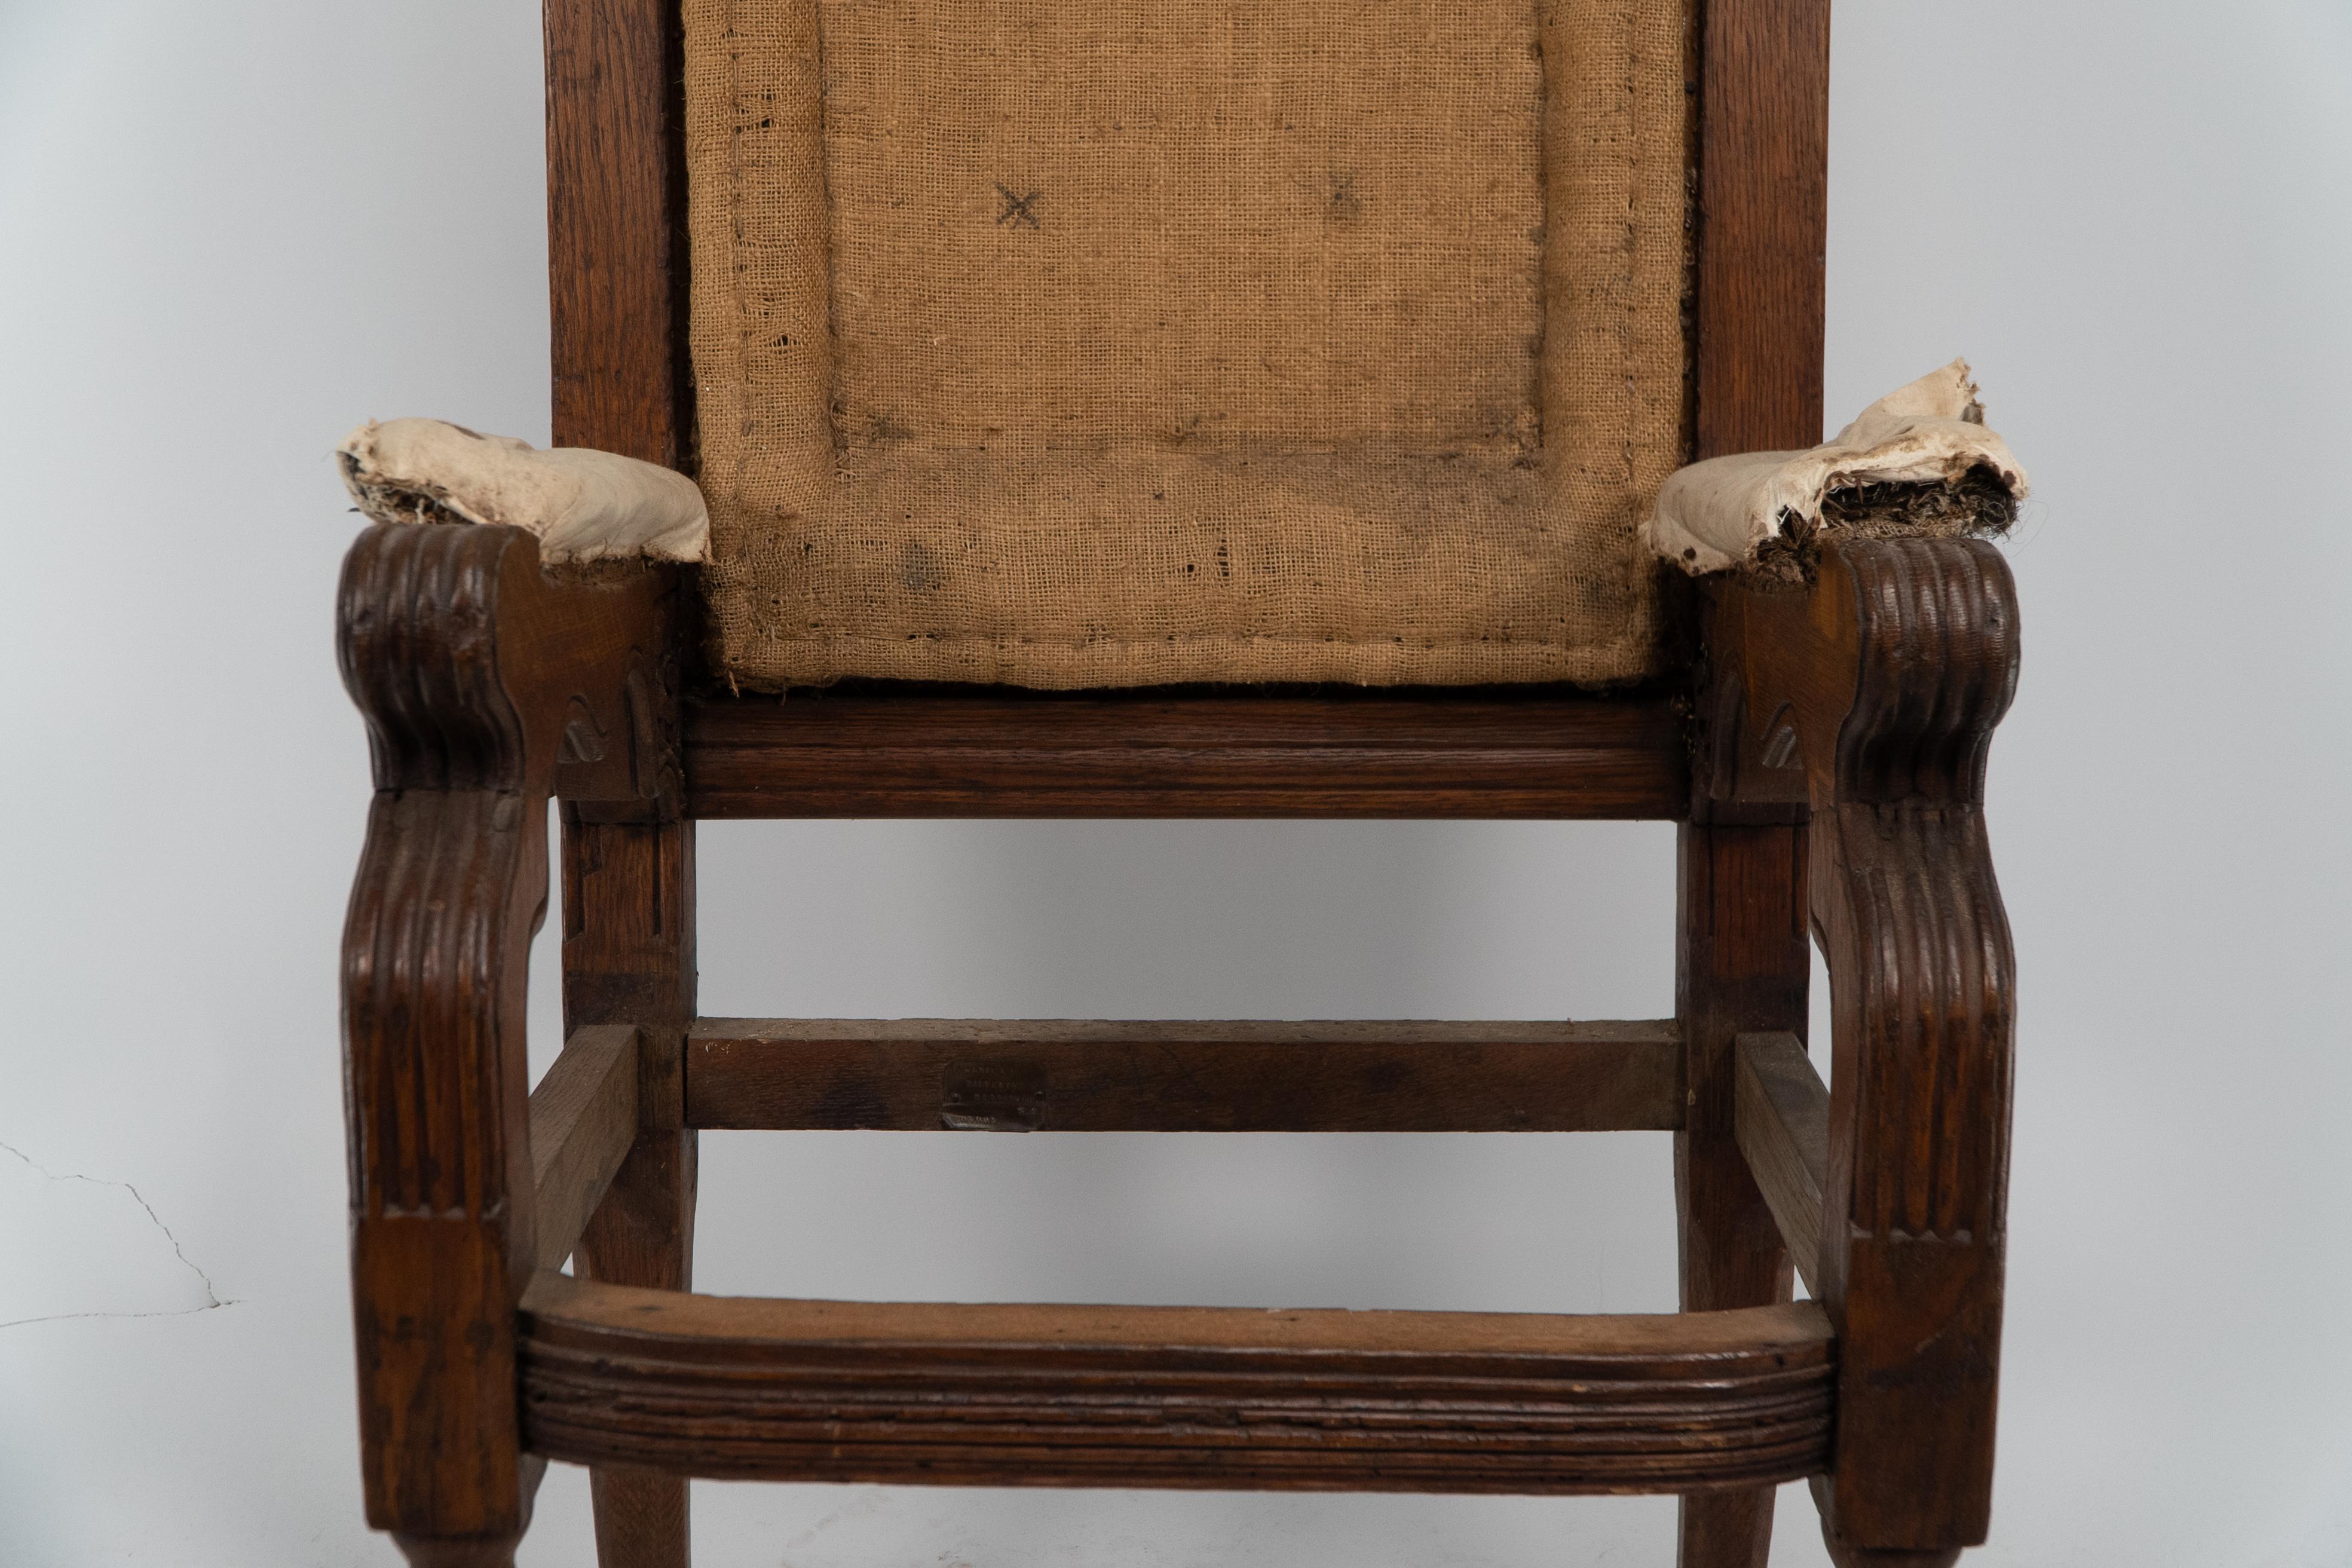 Oak George Edmund Street. Judges armchair designed for The Royal Courts of Justice. For Sale